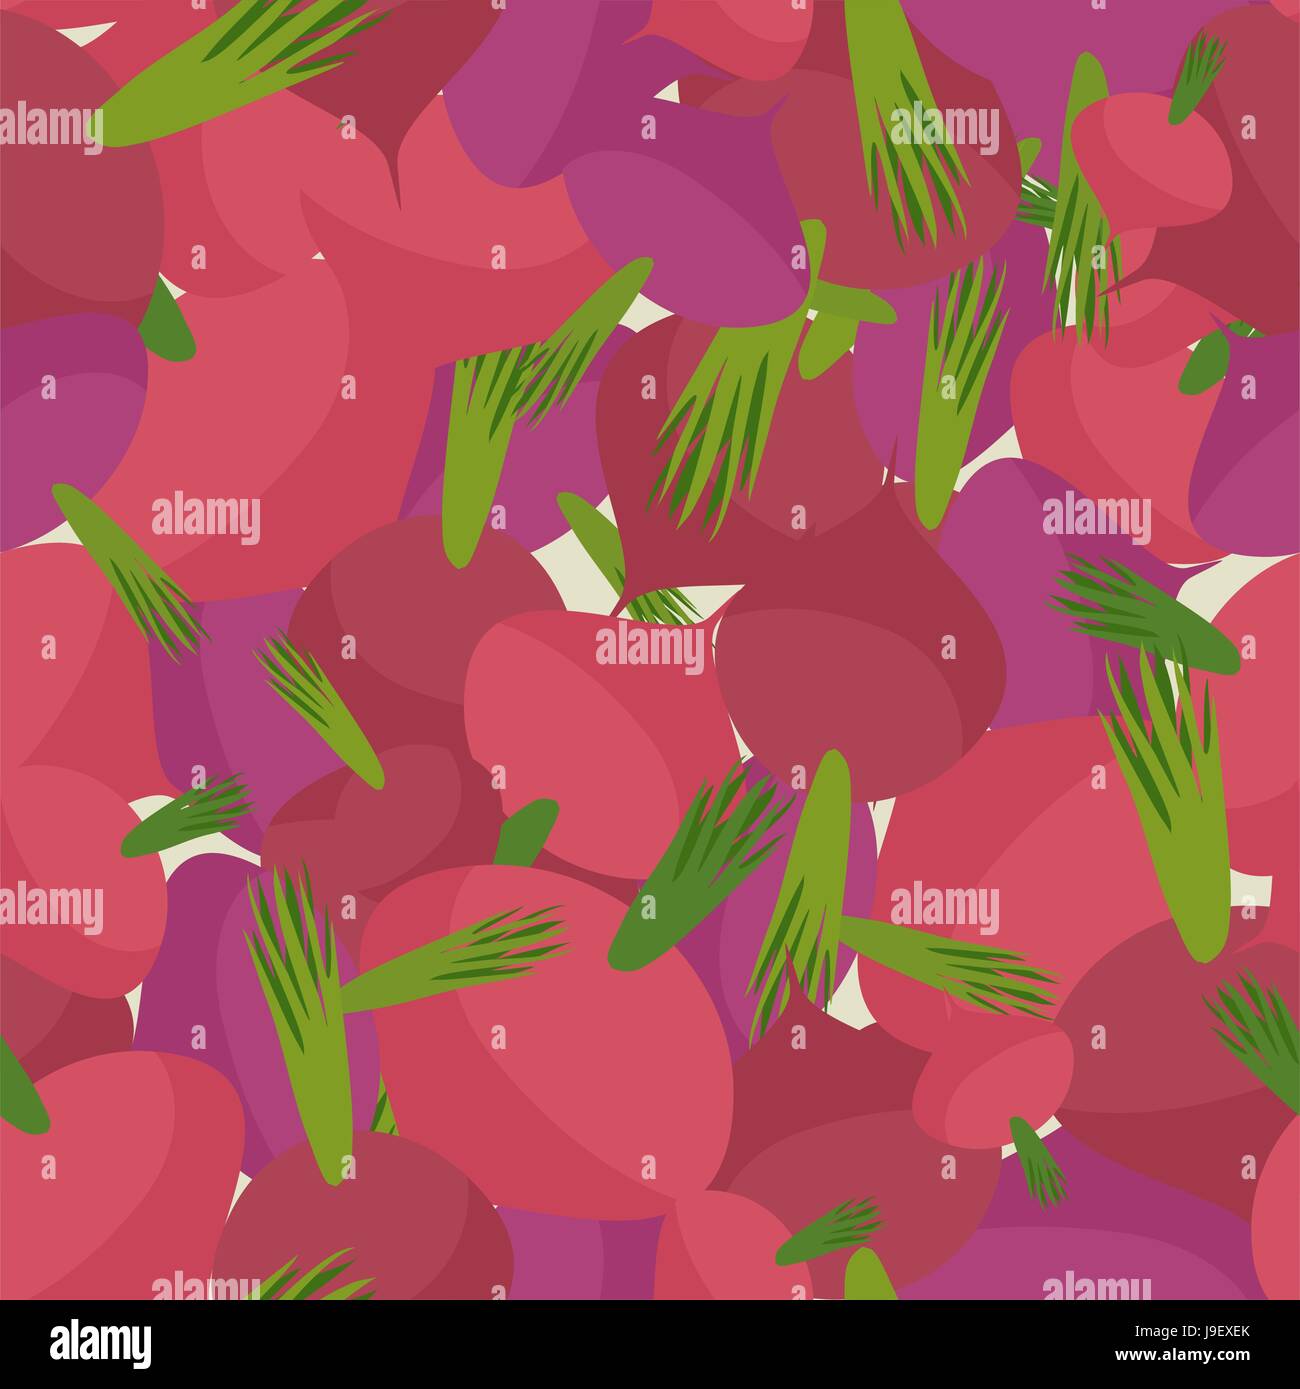 Background Of Burgundy Beets Vector Seamless Pattern Of Vegetables Vector Texture Stock Vector